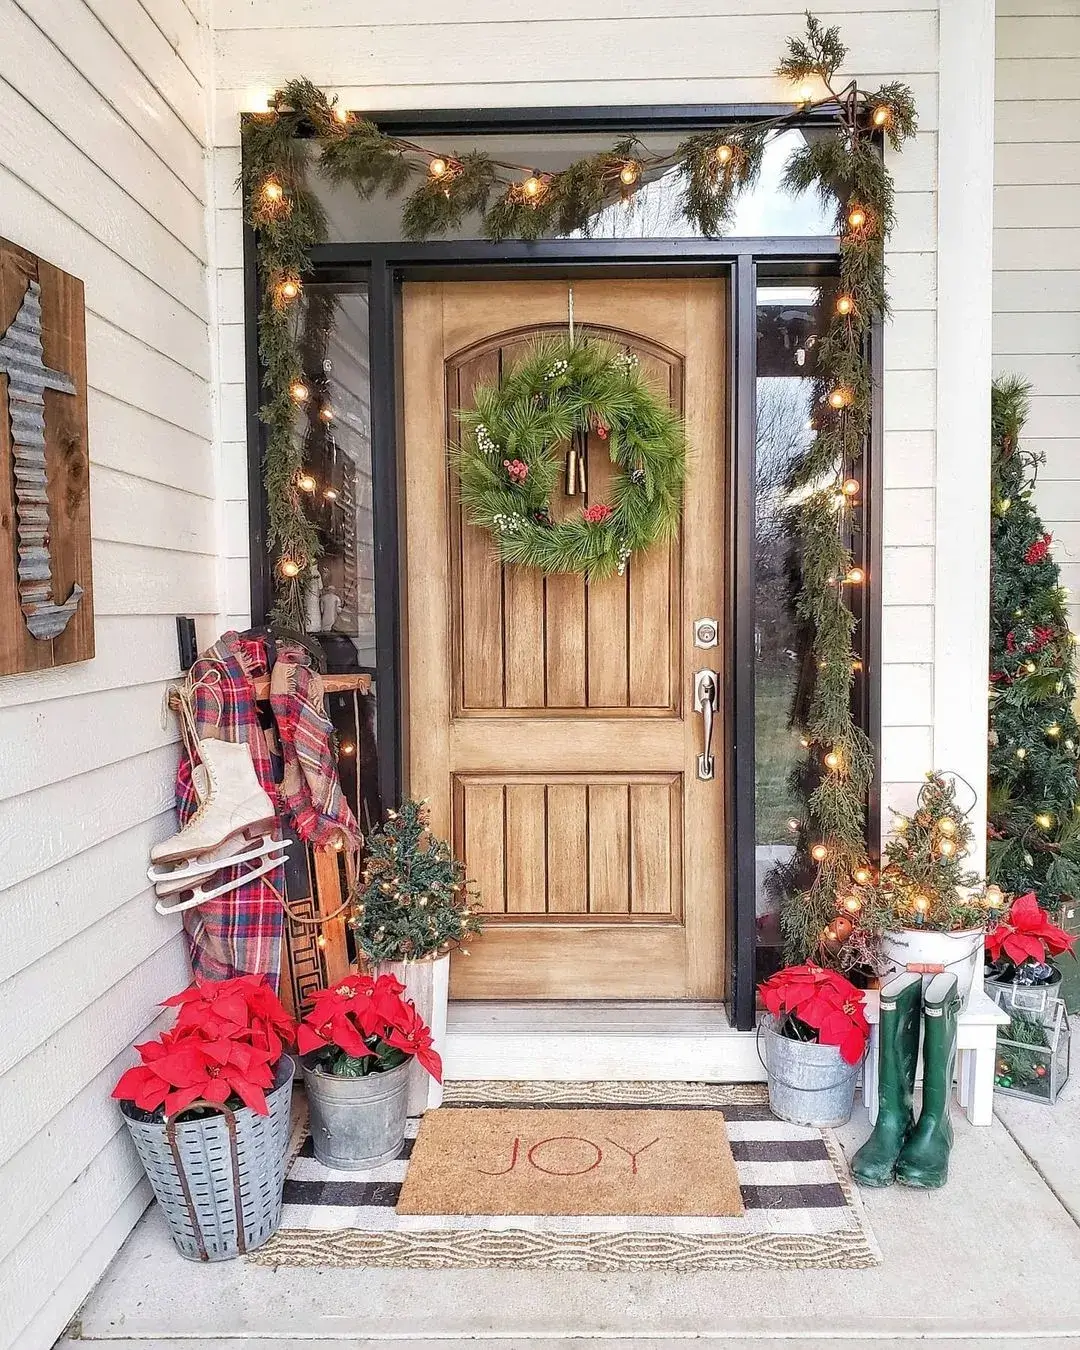 Beautify your front porch with 43 amazing winter decorating ideas - 283